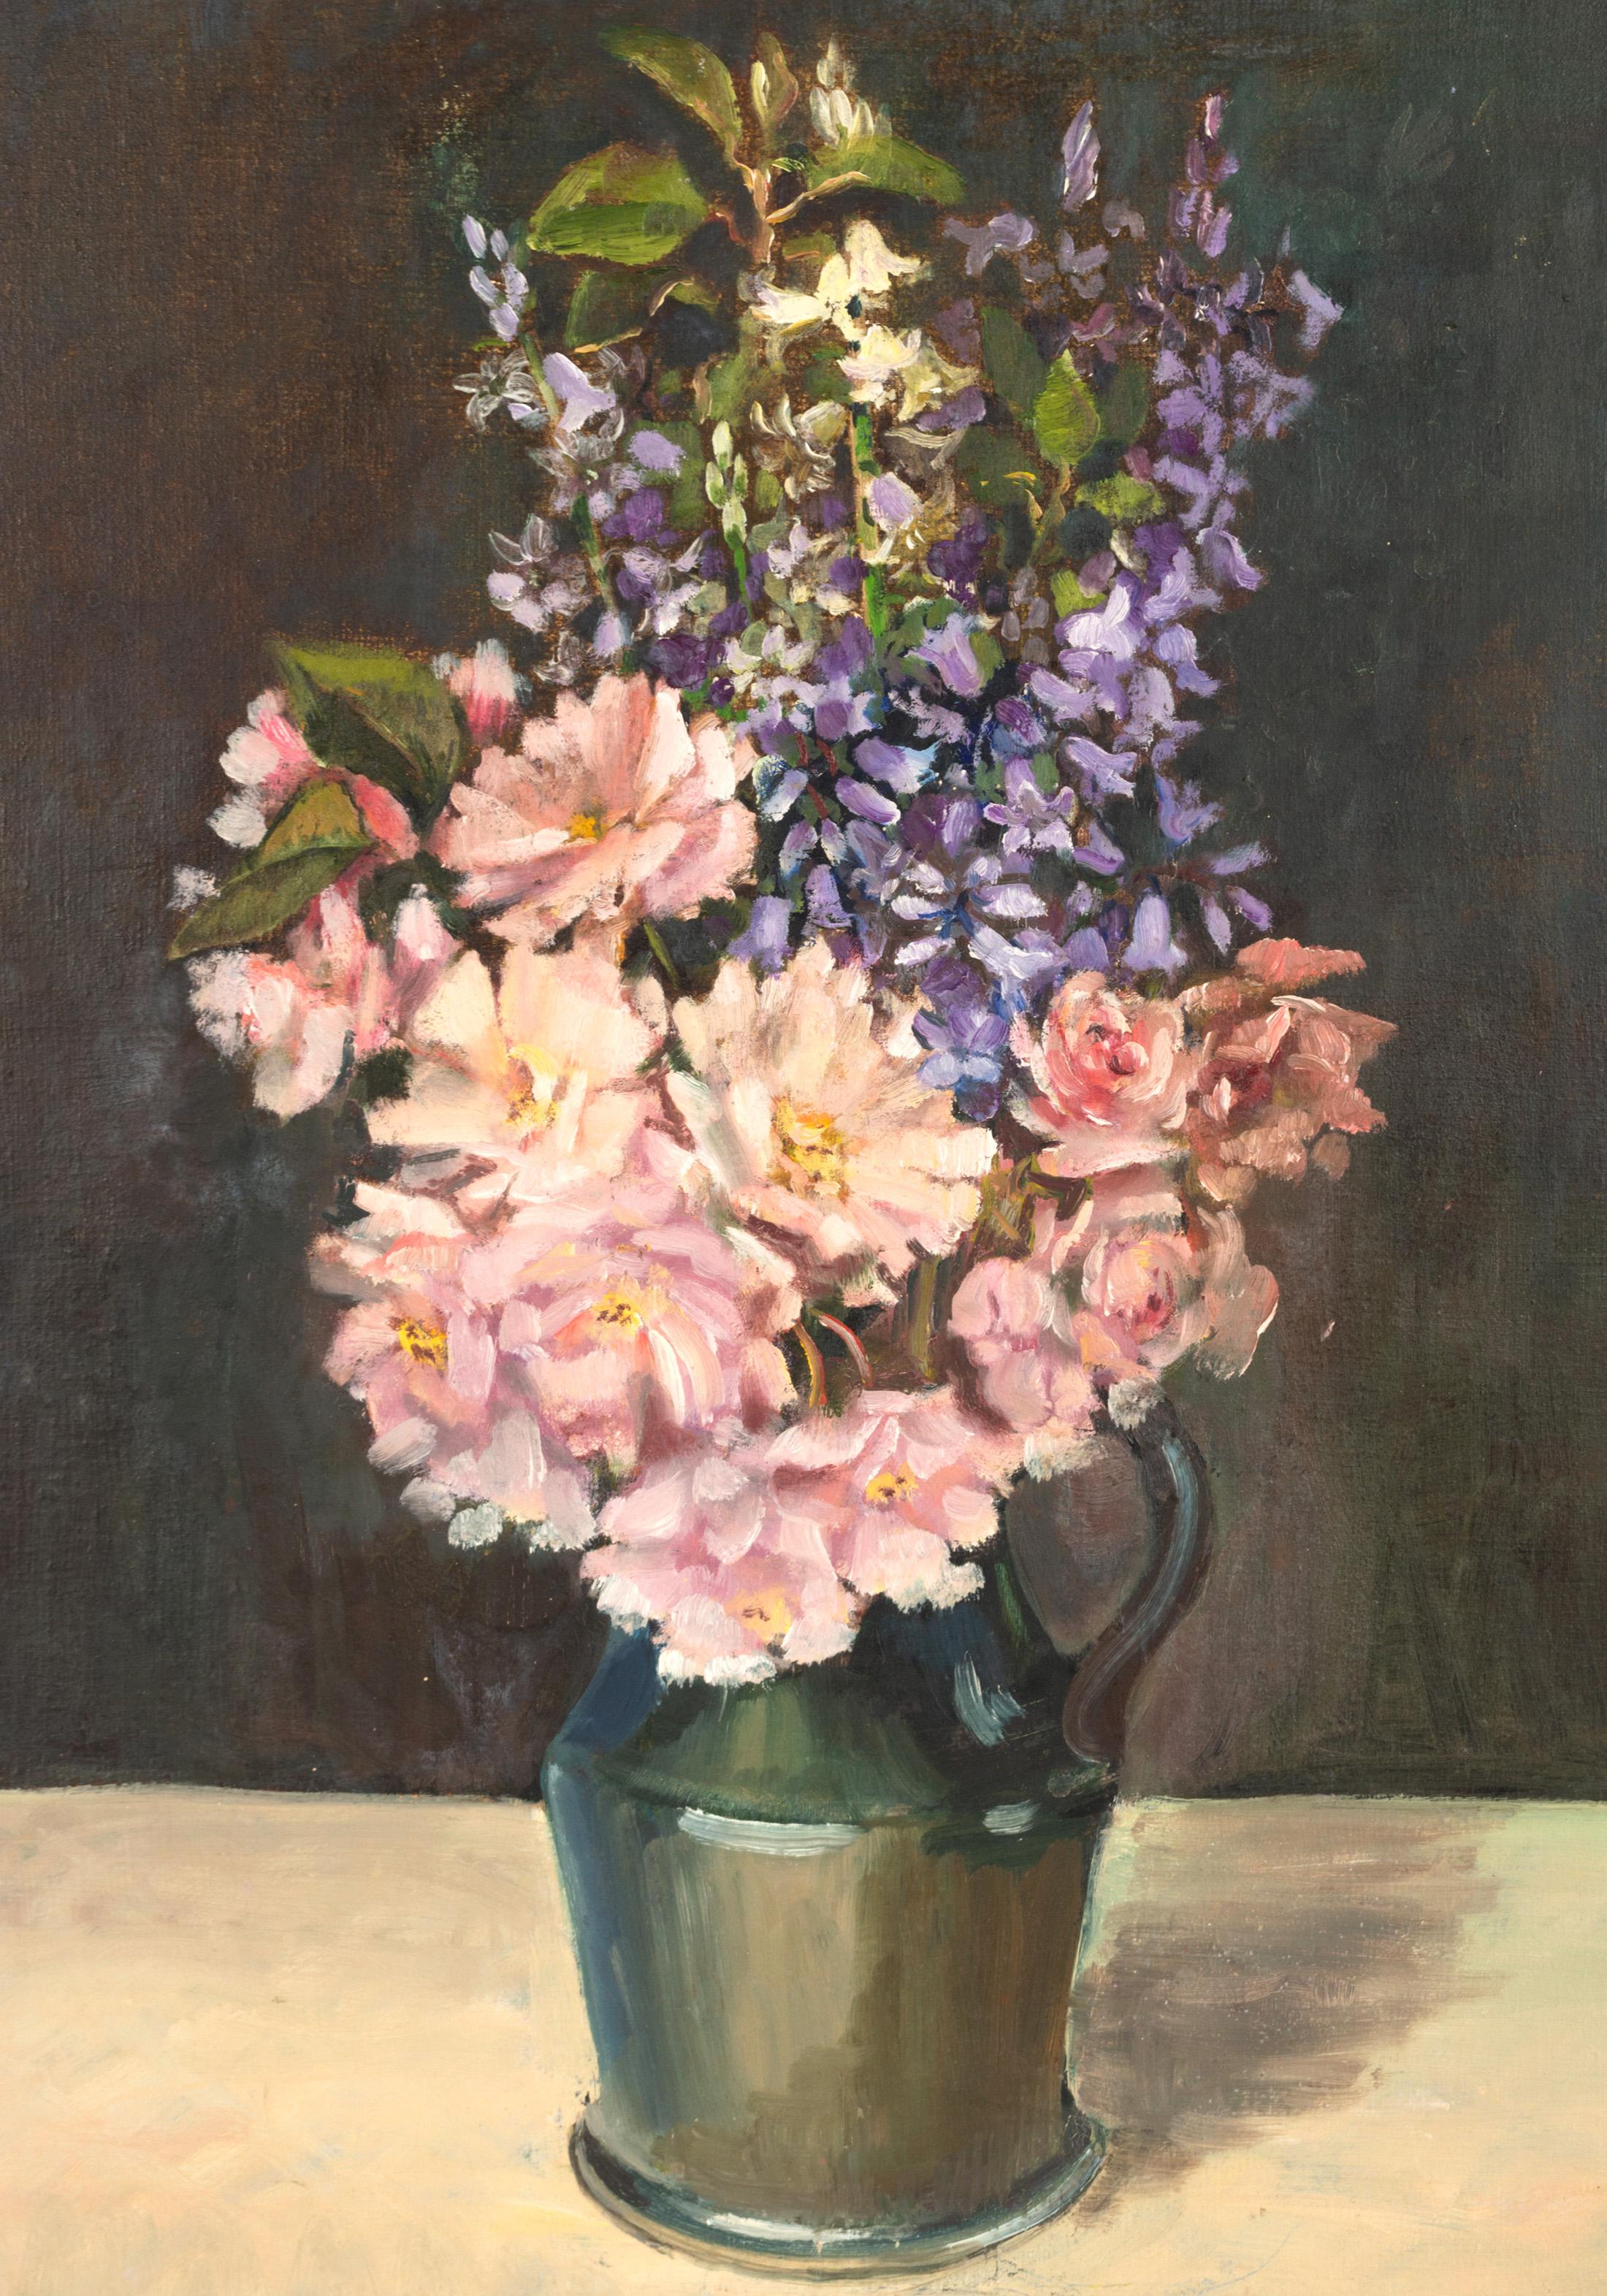 Mid 20th Century still life flowers in a jug. 
Signed bottom right by the artist Stella Lane.
Oil On Board. 
Framed.
Provenance: Private London Collection
In very good condition commensurate of age.

Stella Lane (1915-2002). 
Stella Marie